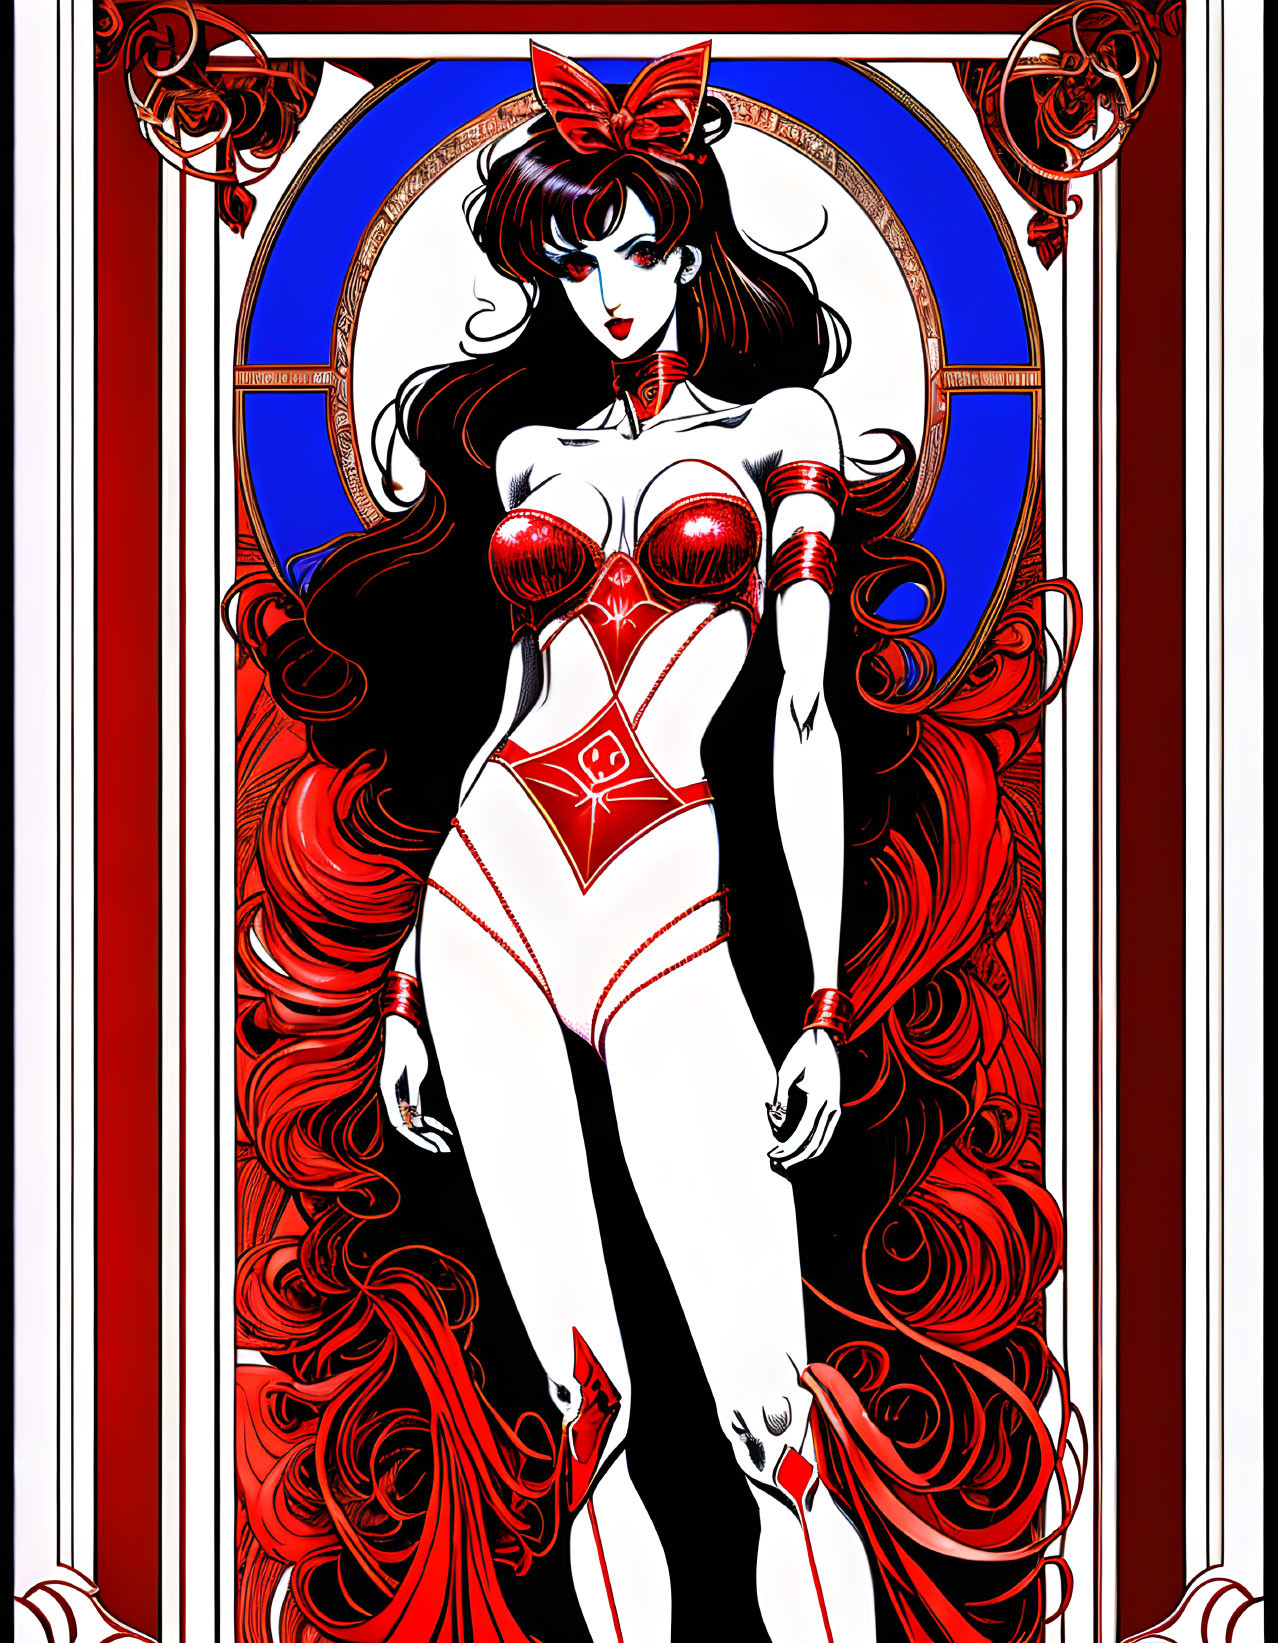 Stylized female figure with red hair in Art Nouveau border